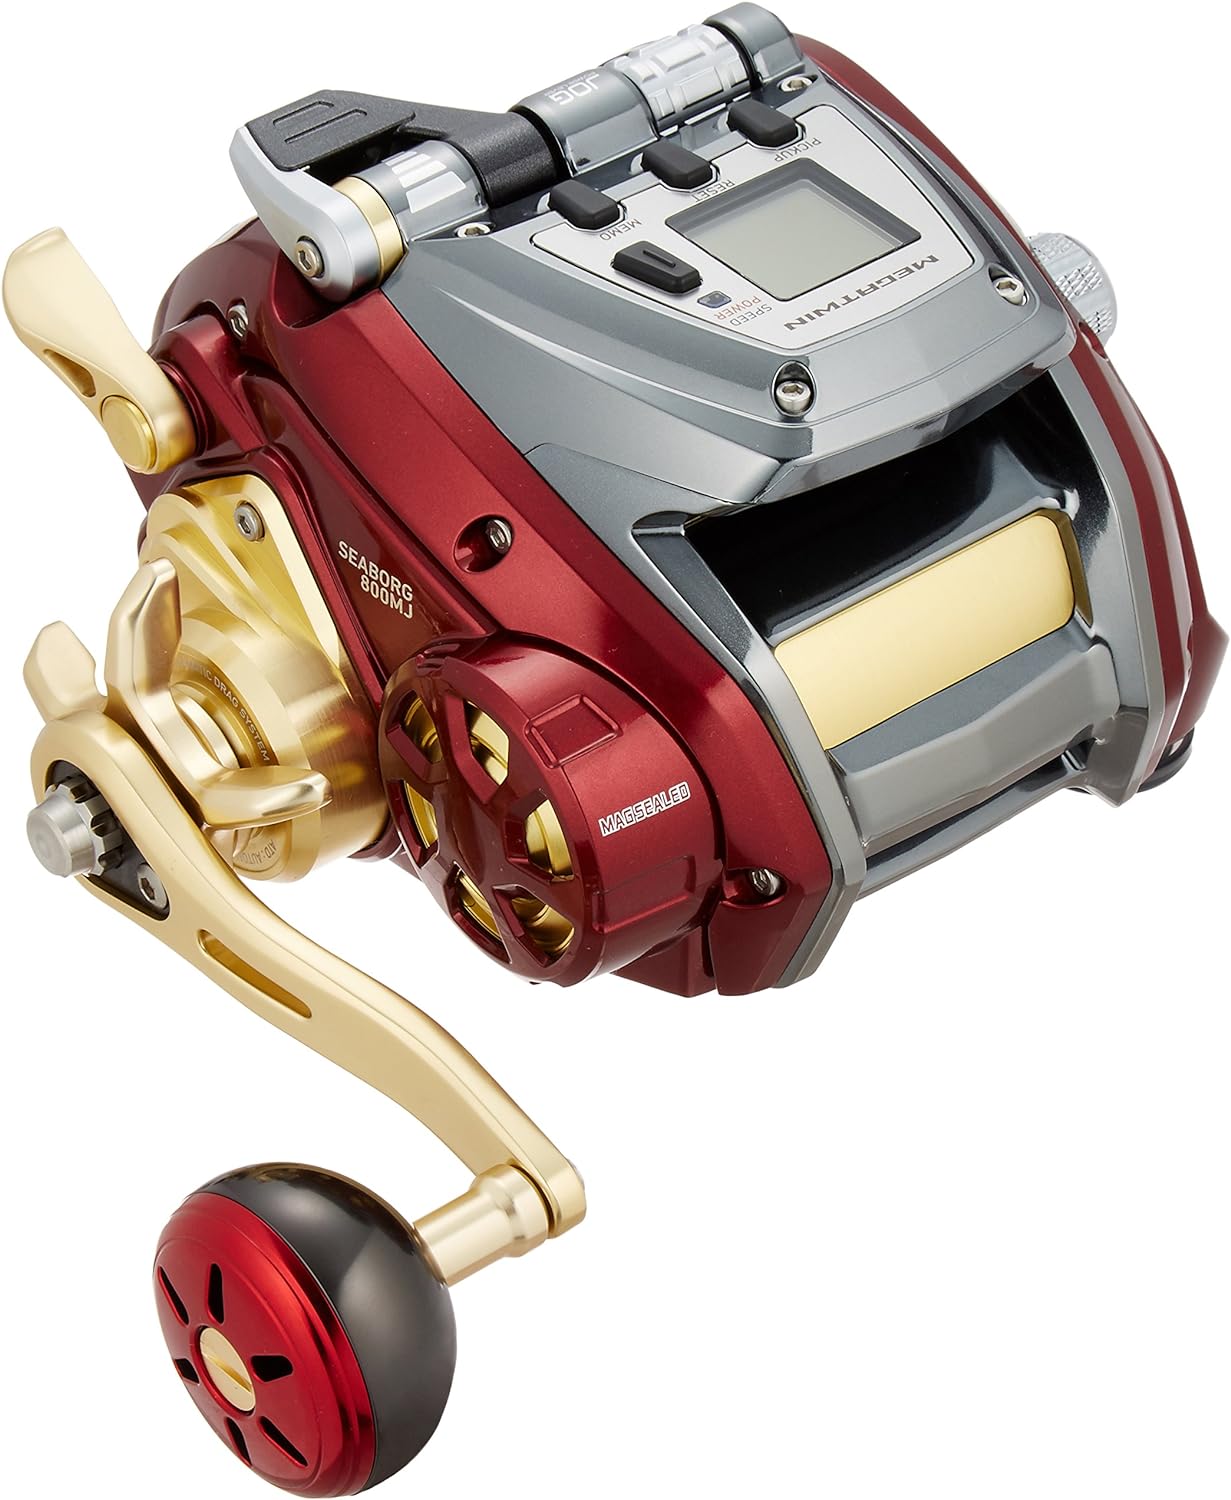 DAIWA Electric Reel Seaborg 800MJ Right Handle 2017 Model - Discovery Japan  Mall